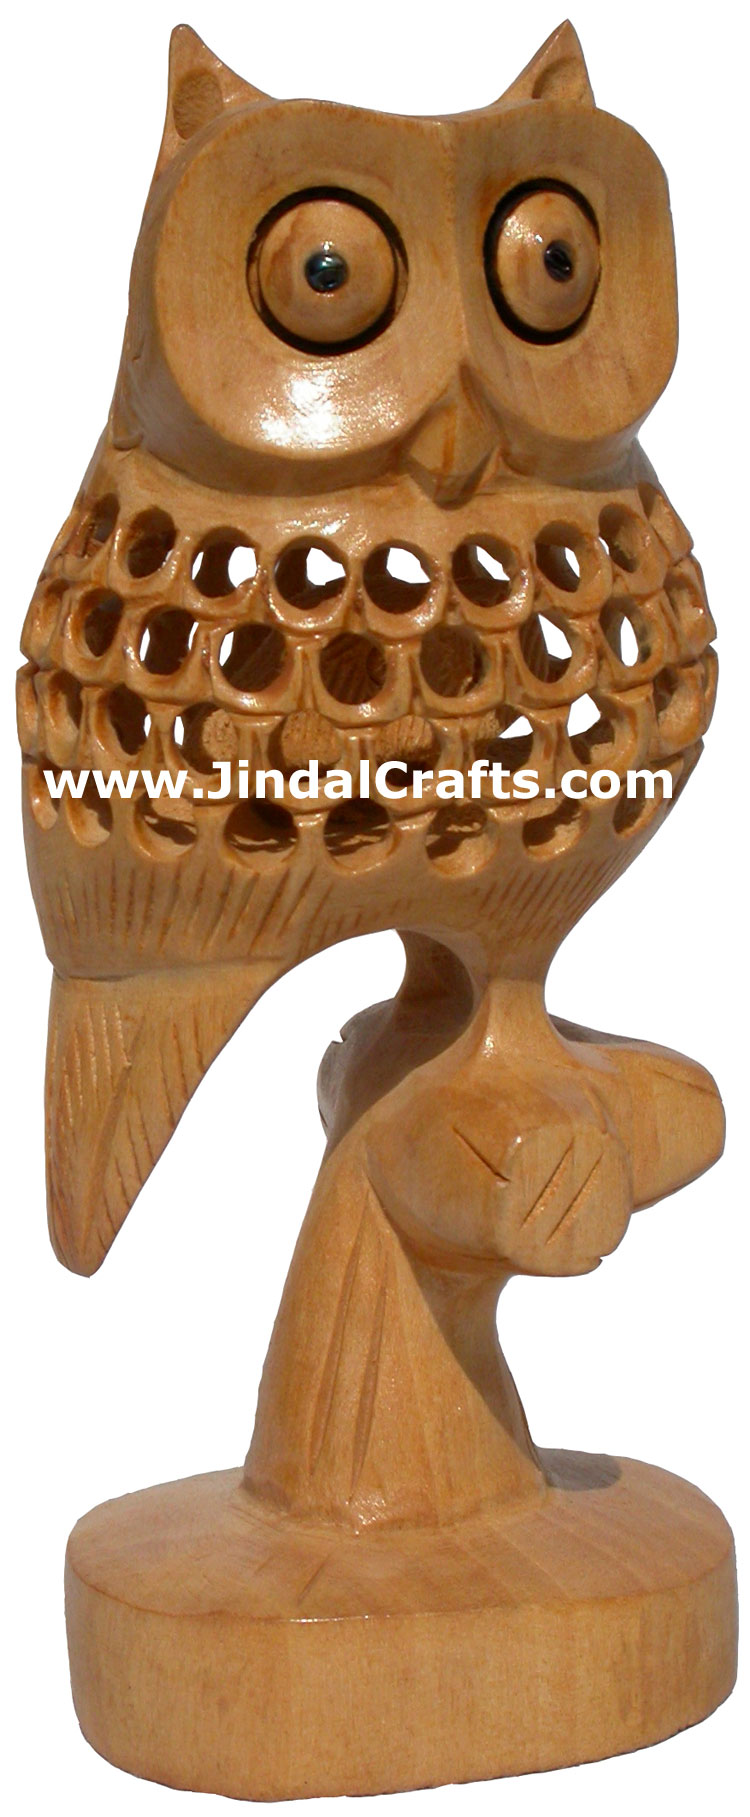 Hand Carved Wooden Lucky Owl India Artifact Decoration Figurine Sculpture Idols